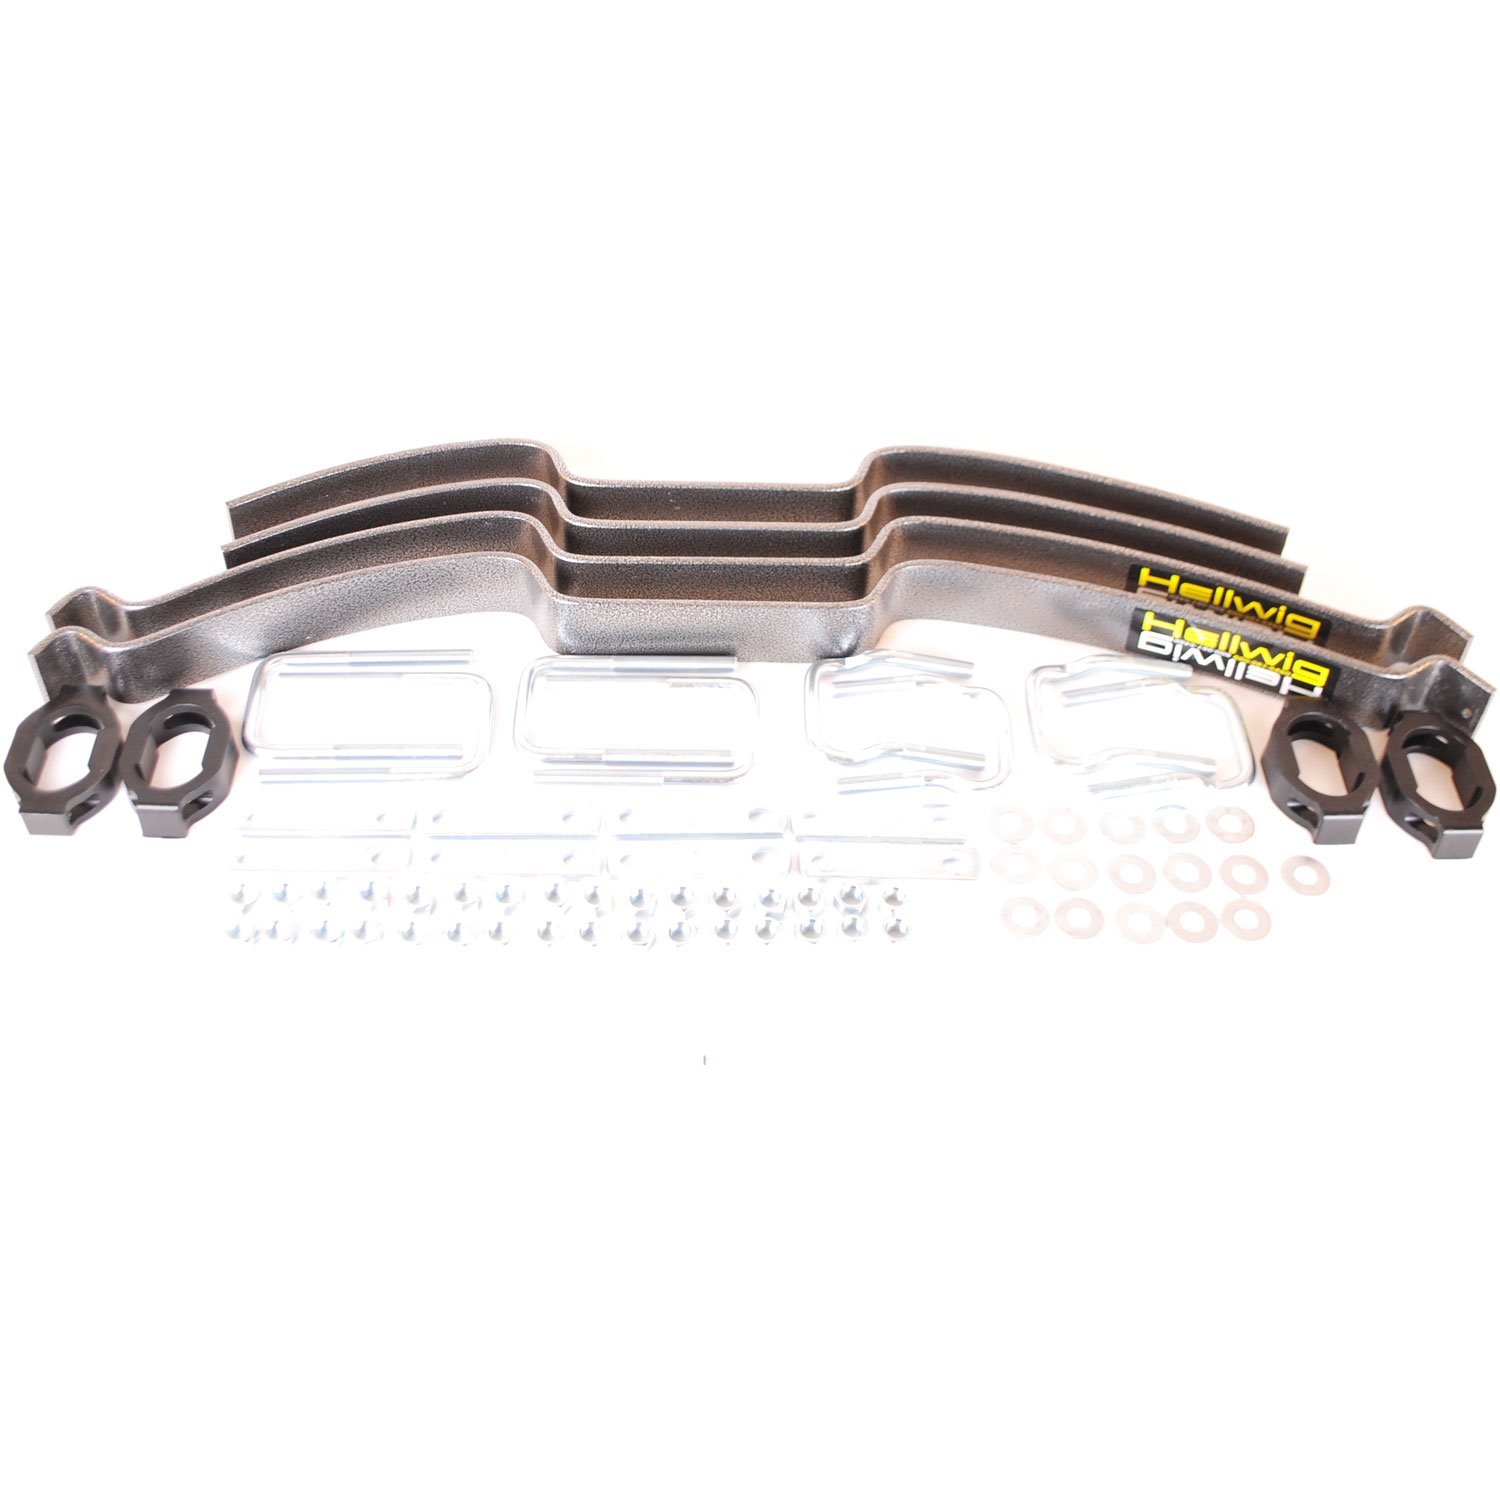 Pro Series Helper Springs for 1975-2016 Chevy and GMC Trucks